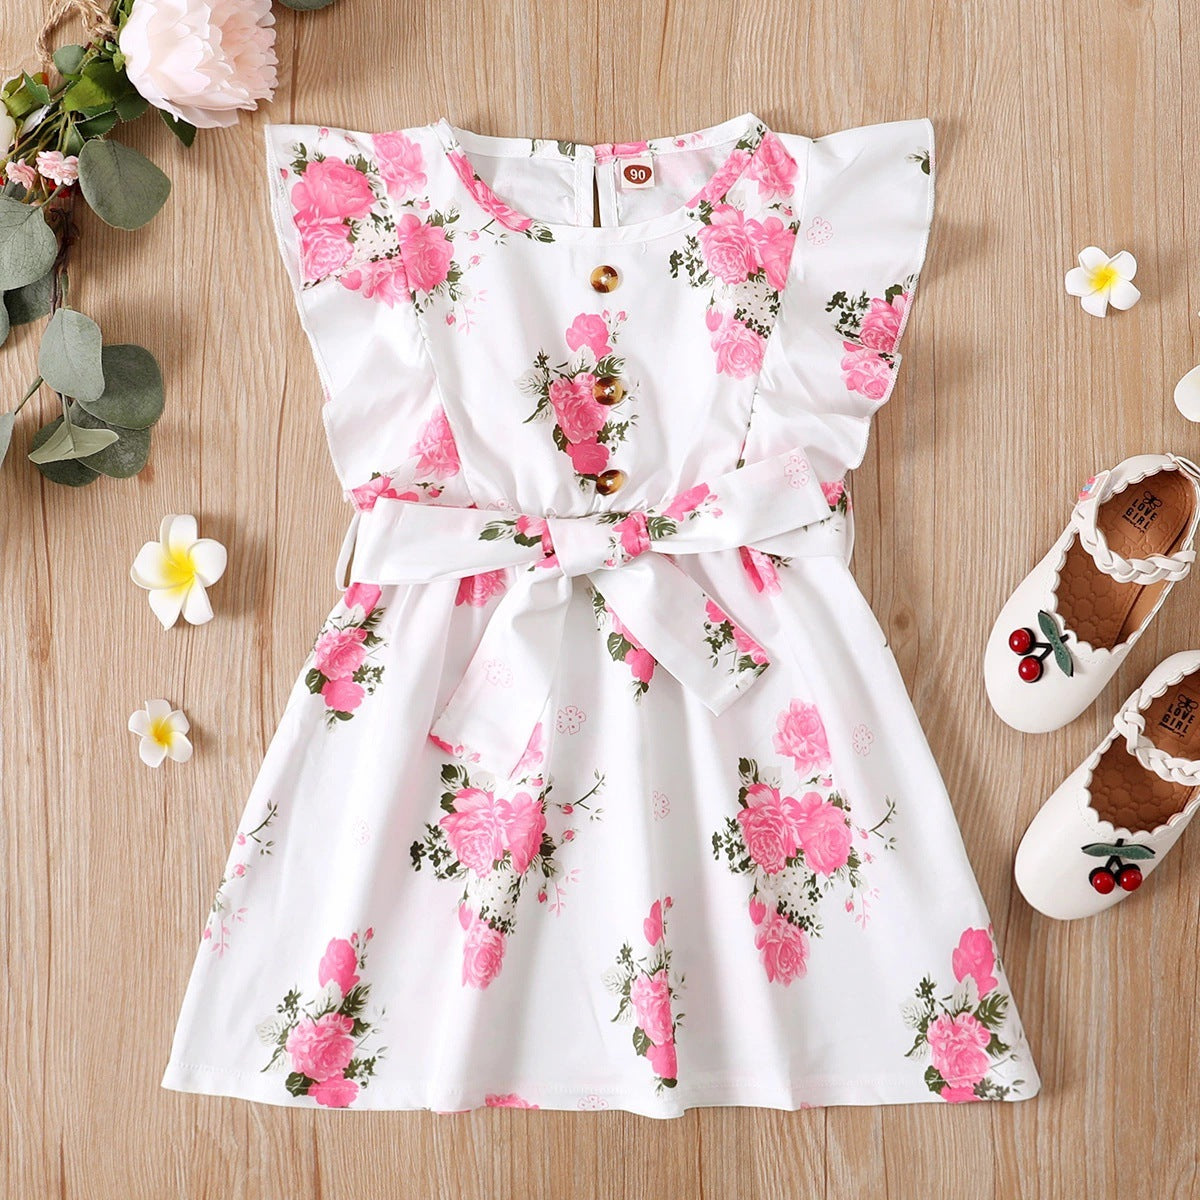 Small And Medium-sized Children's Small Flying Sleeves Ruffled Print Floral Belt Dress